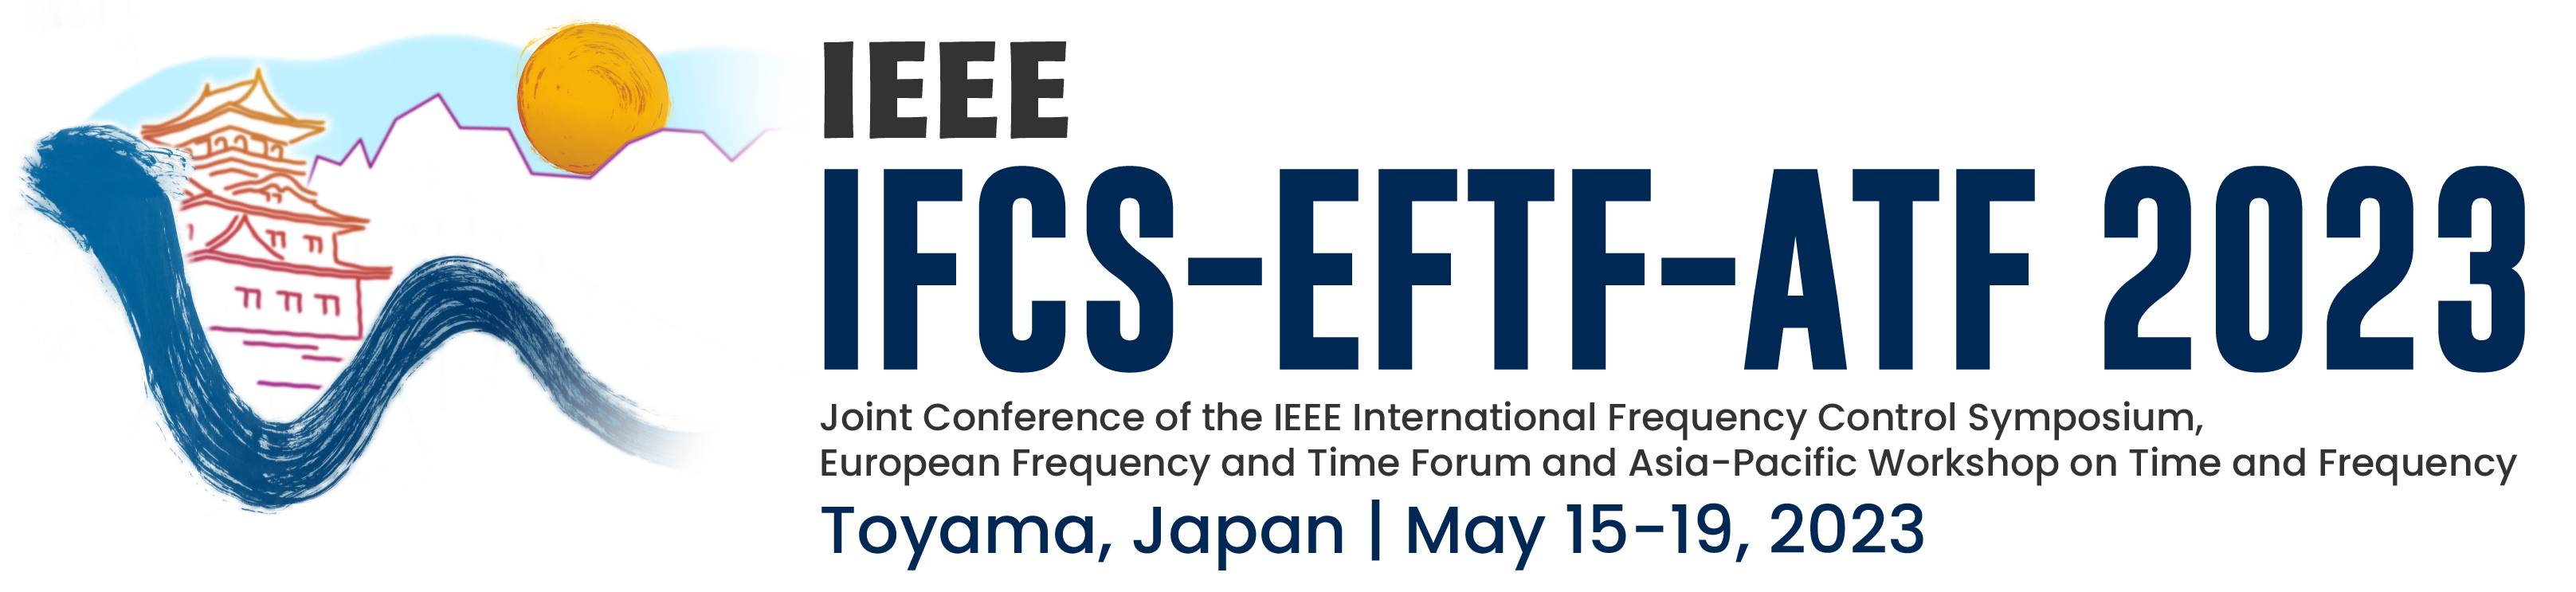 Joint Conference of the European Frequency and Time Forum & The IEEE International Frequency Control Symposium 2023 logo